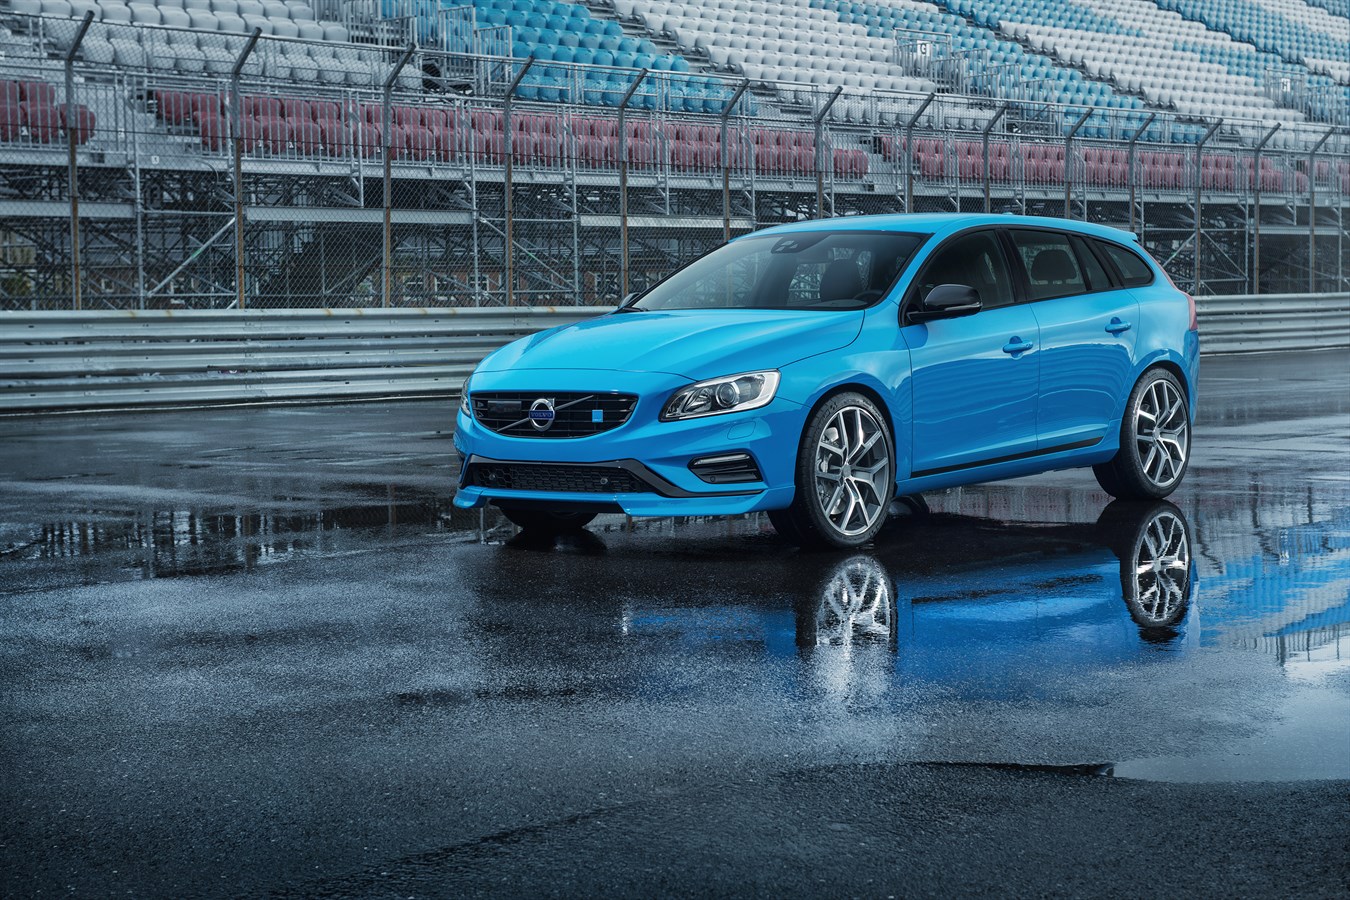 The new Volvo S60 and V60 Polestar are here: world debut for a new Volvo V60 engineered by Polestar